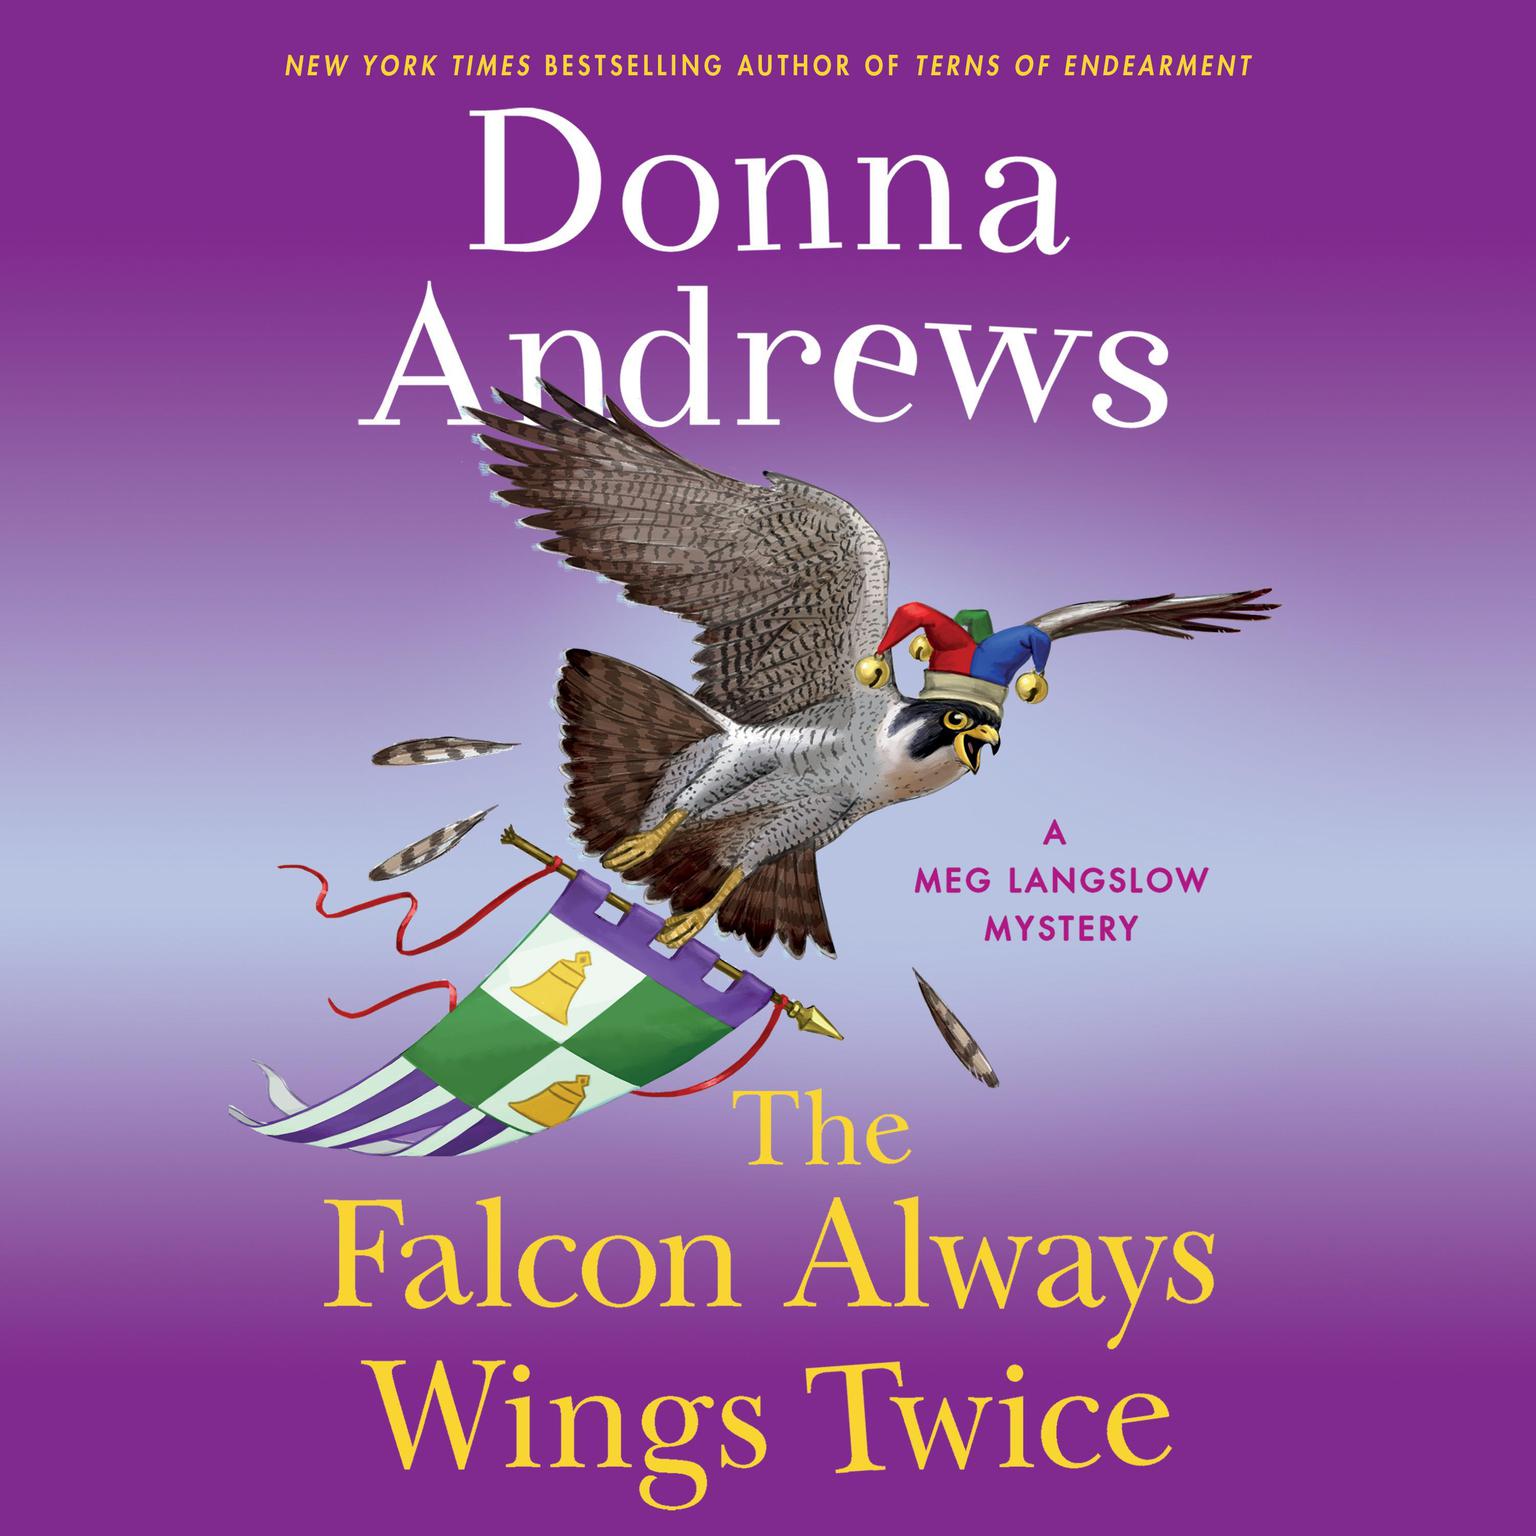 The Falcon Always Wings Twice: A Meg Langslow Mystery Audiobook, by Donna Andrews